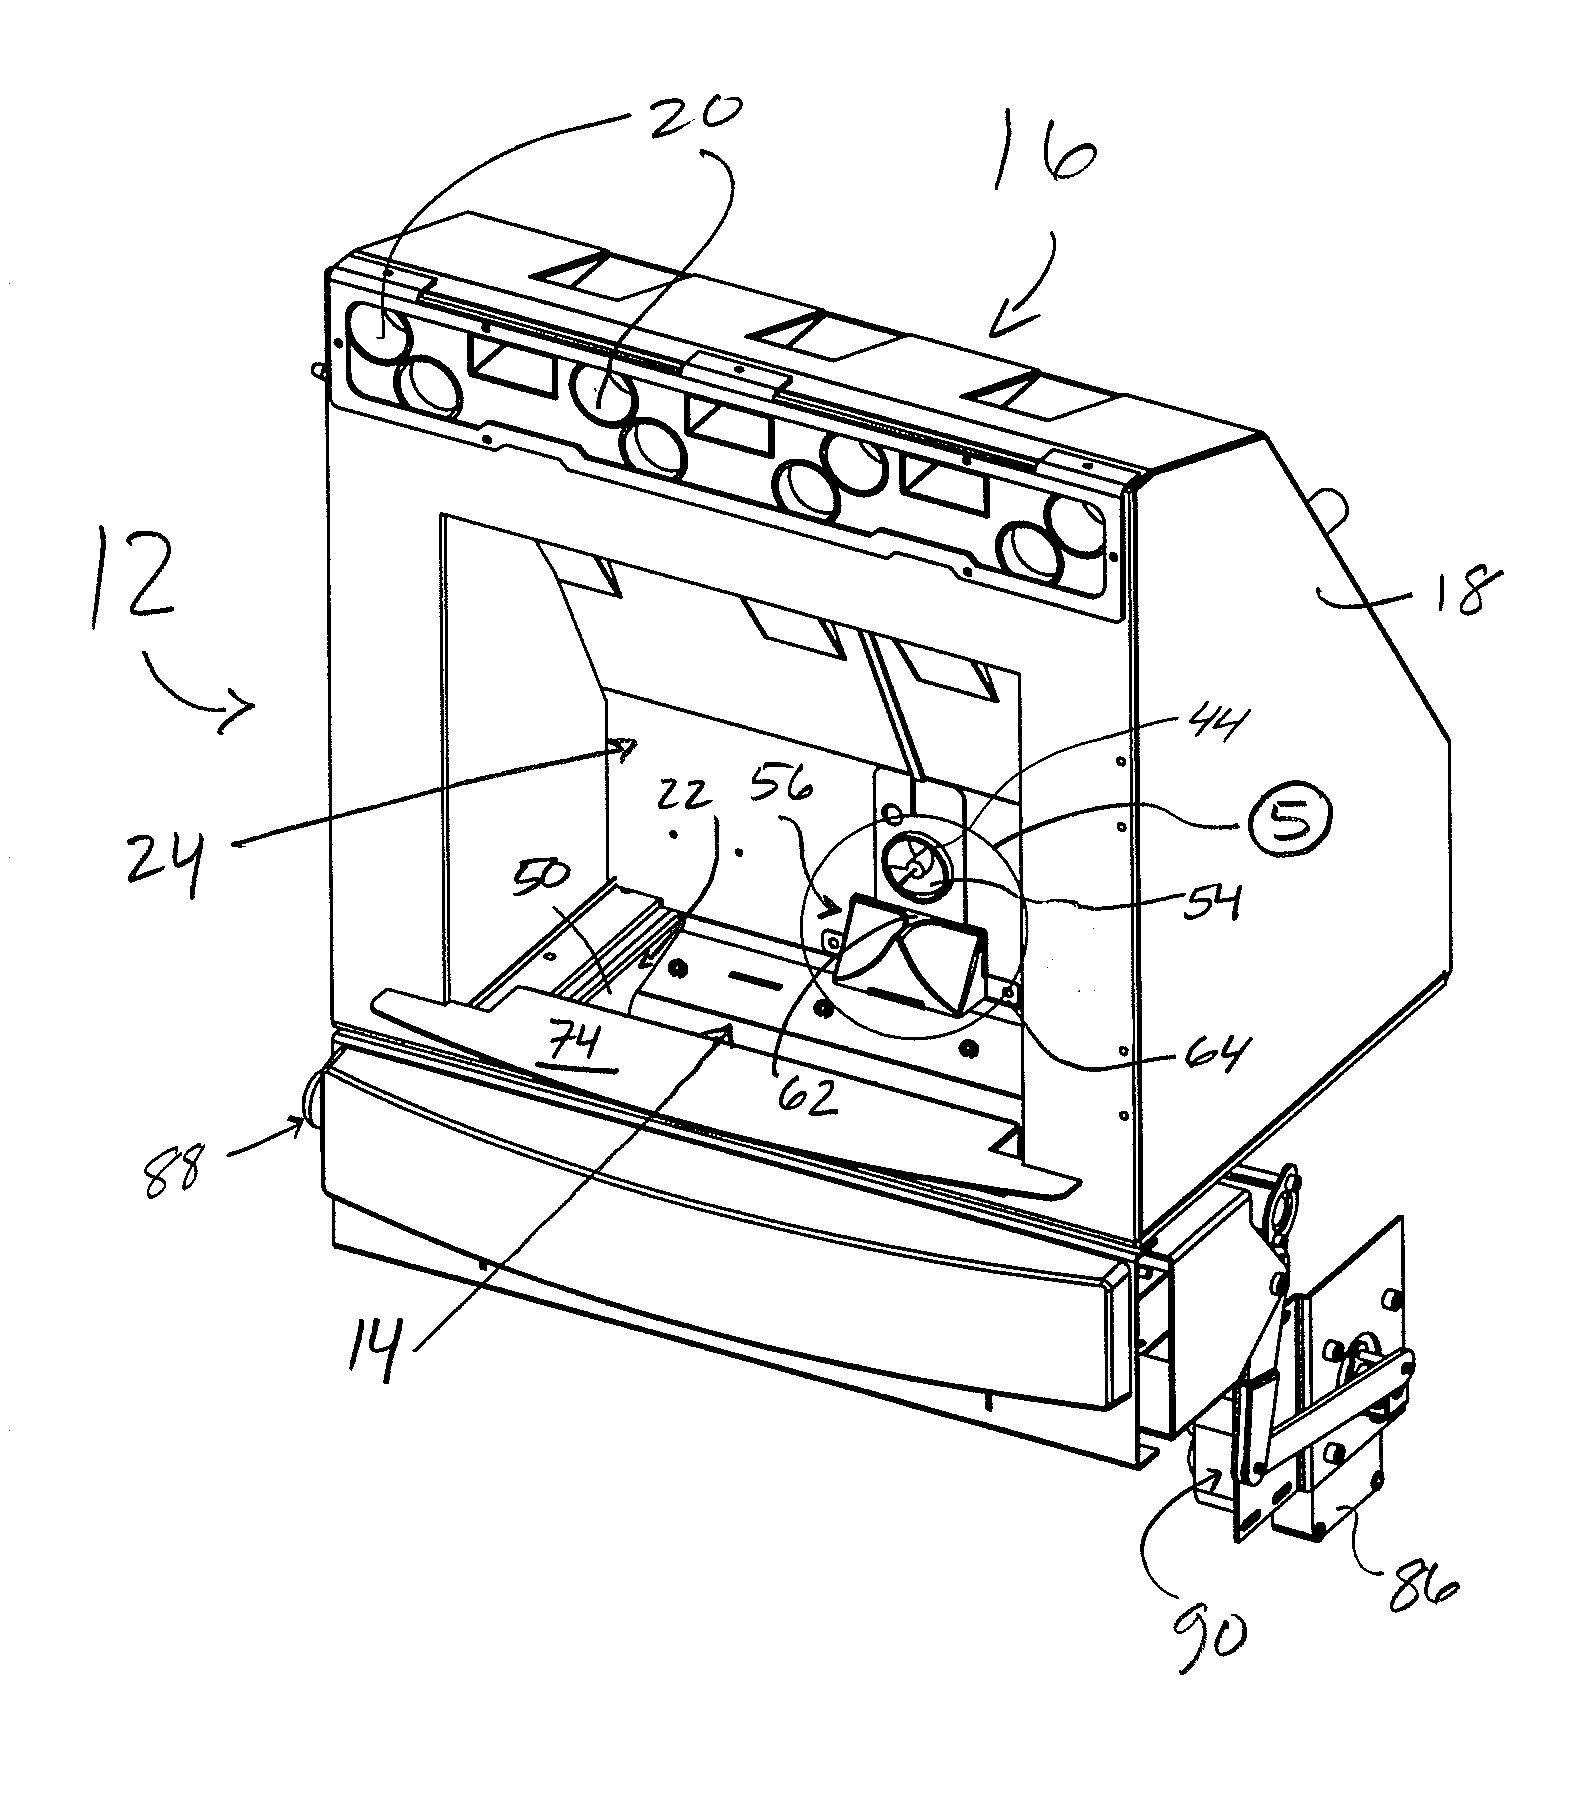 Apparatus for combustion of biofuels